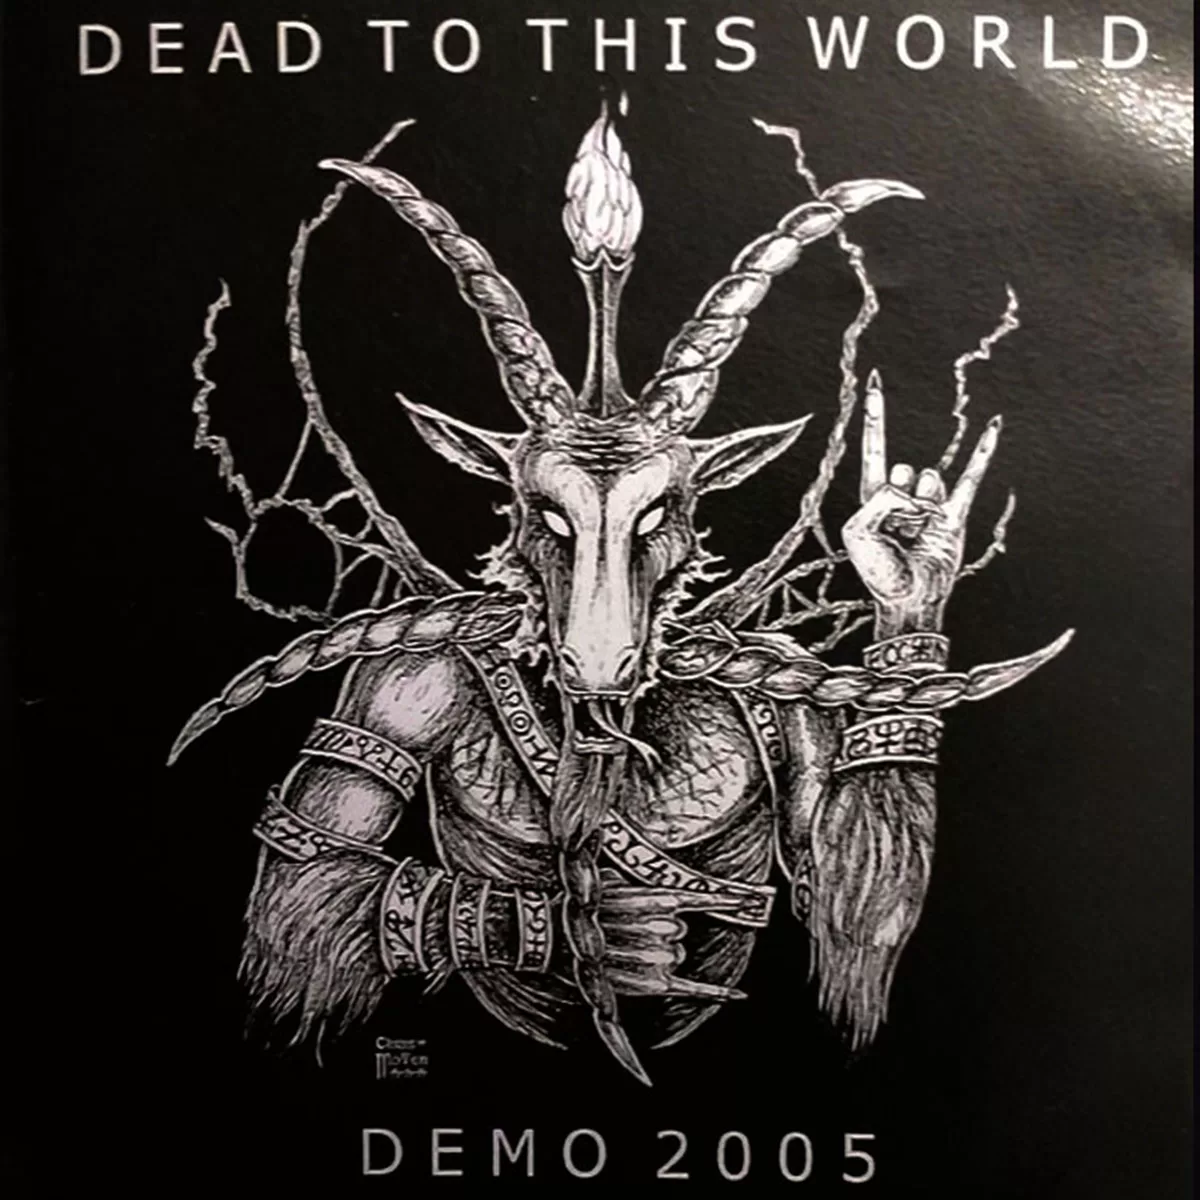 dead to this world demo 2005